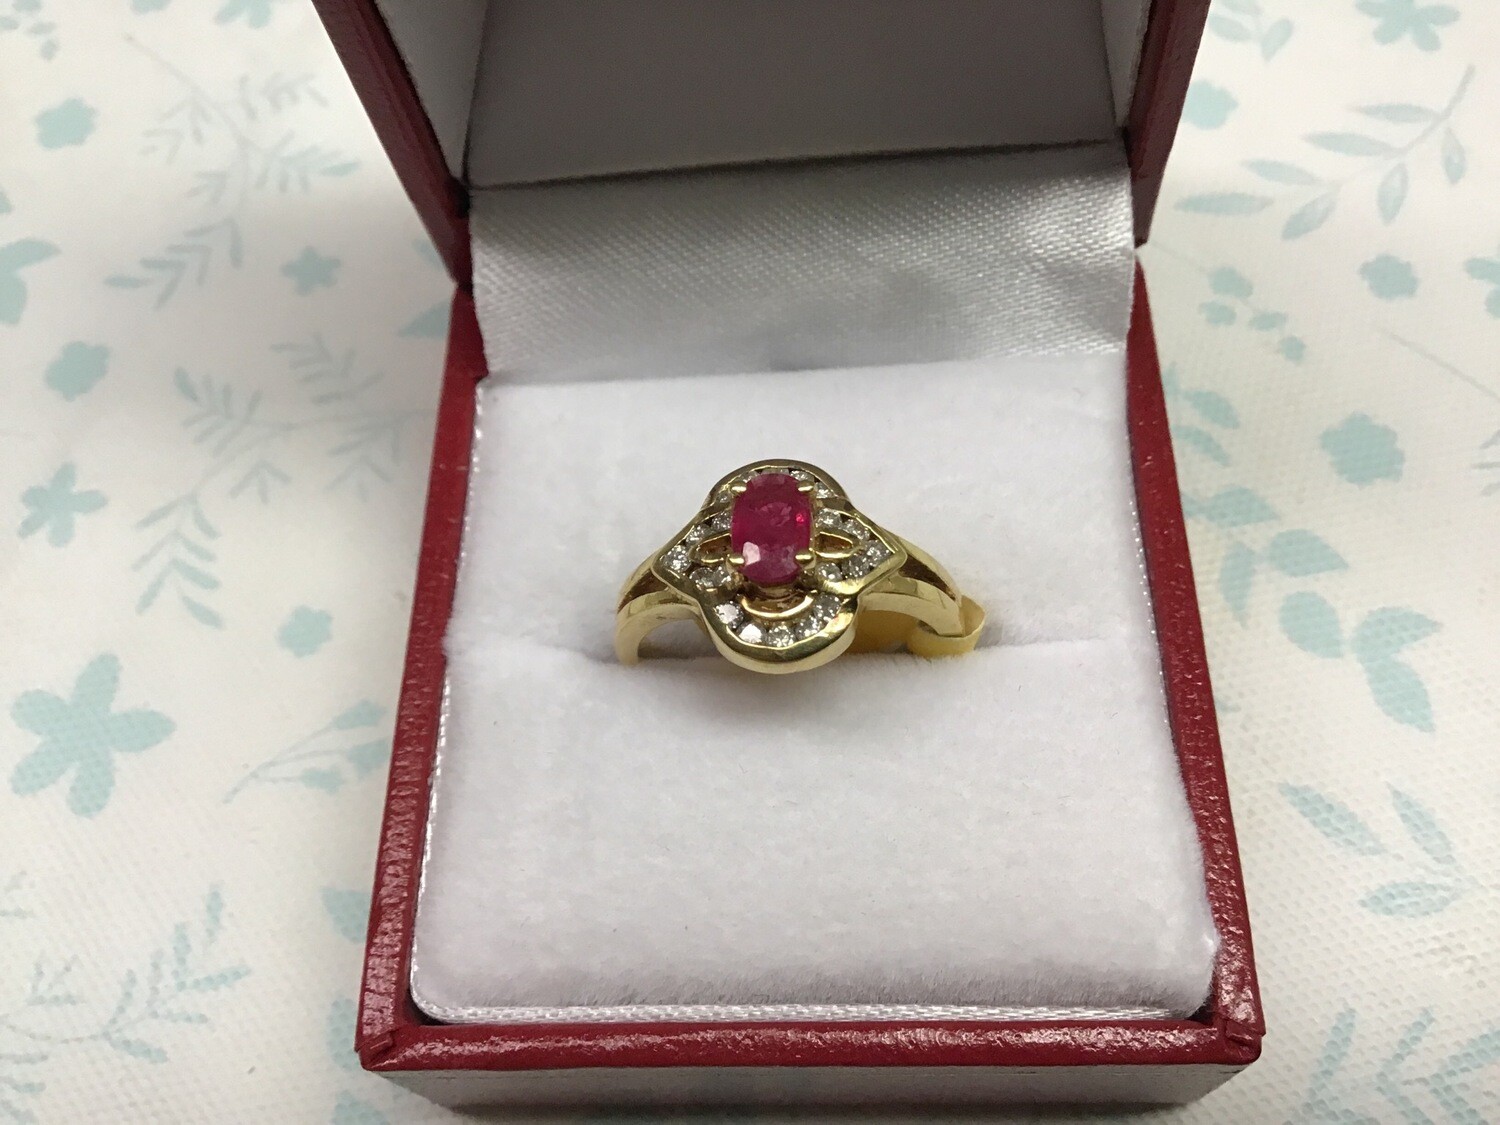 Genuine Oval cut Ruby with Diamond accents set in 14K Yellow gold